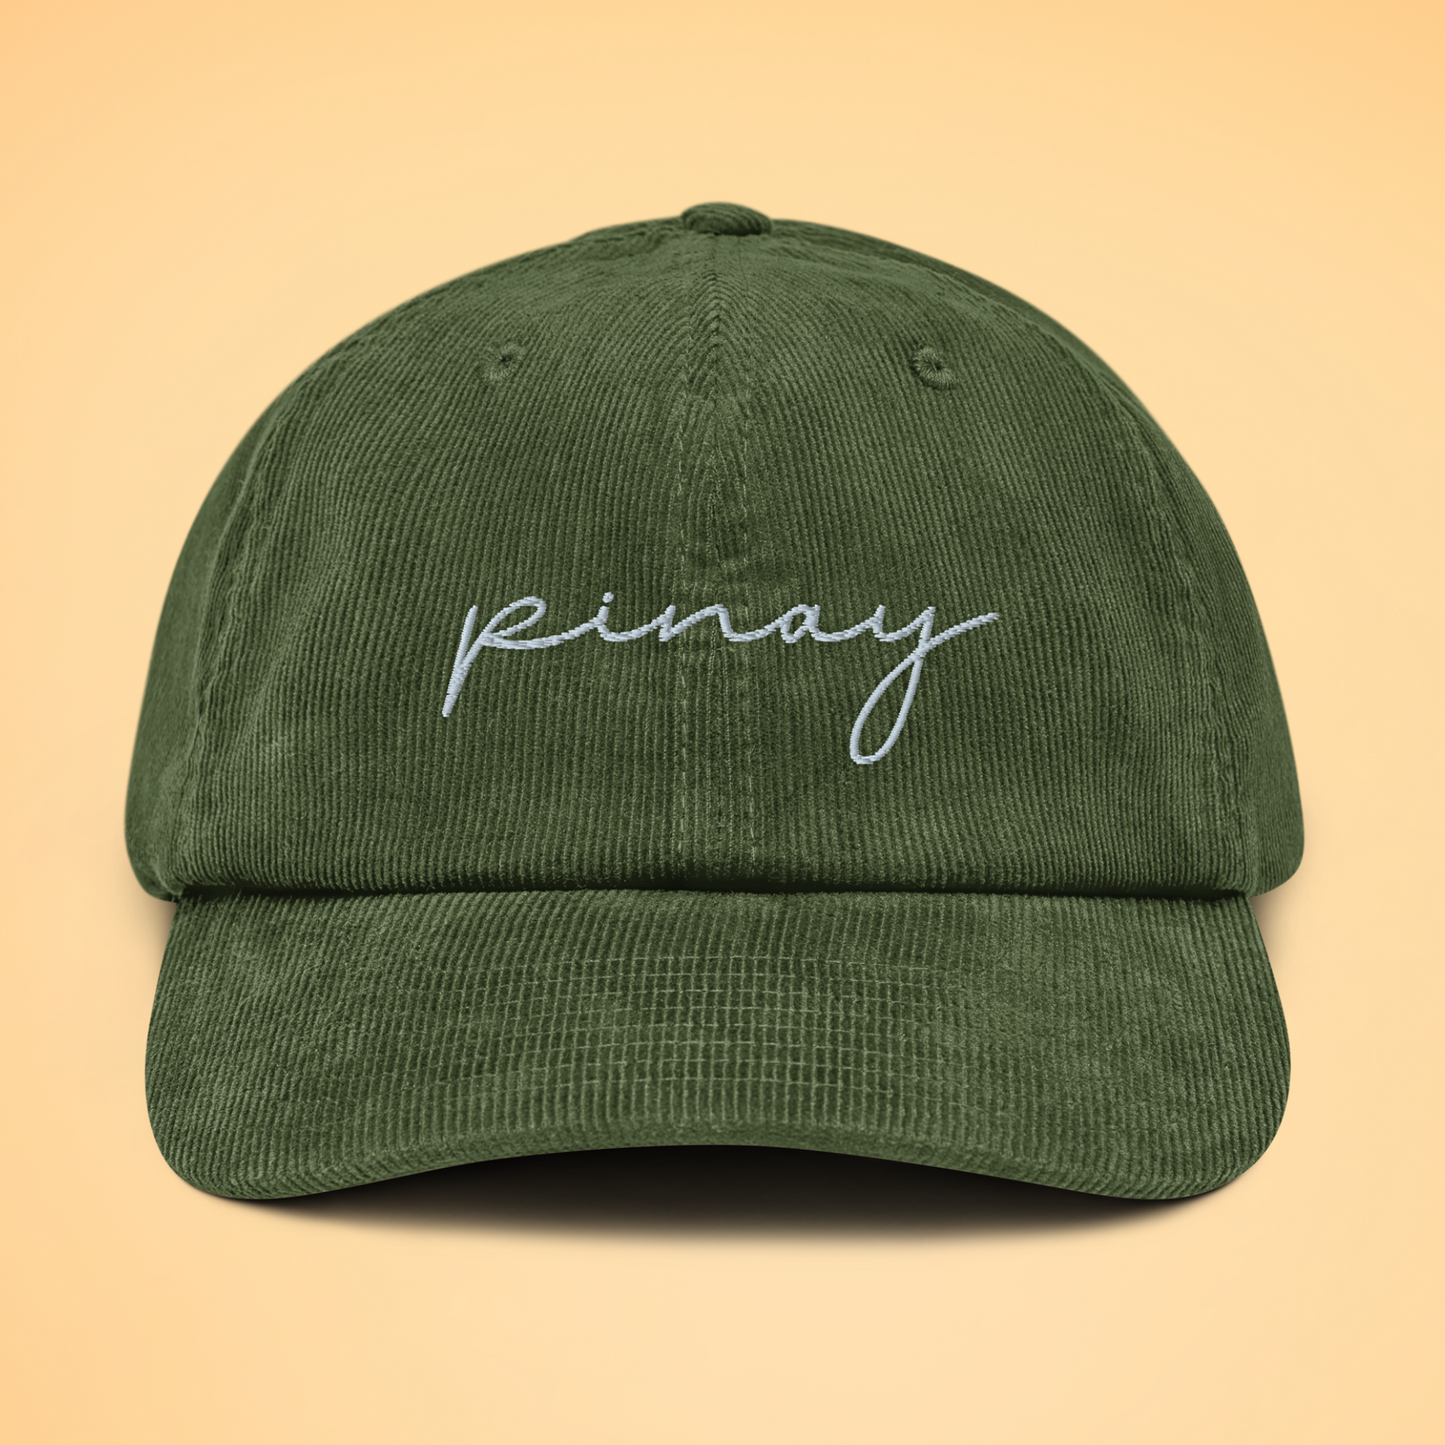 Filipino Pinay Embroidered Cotton Corduroy Cap in Green